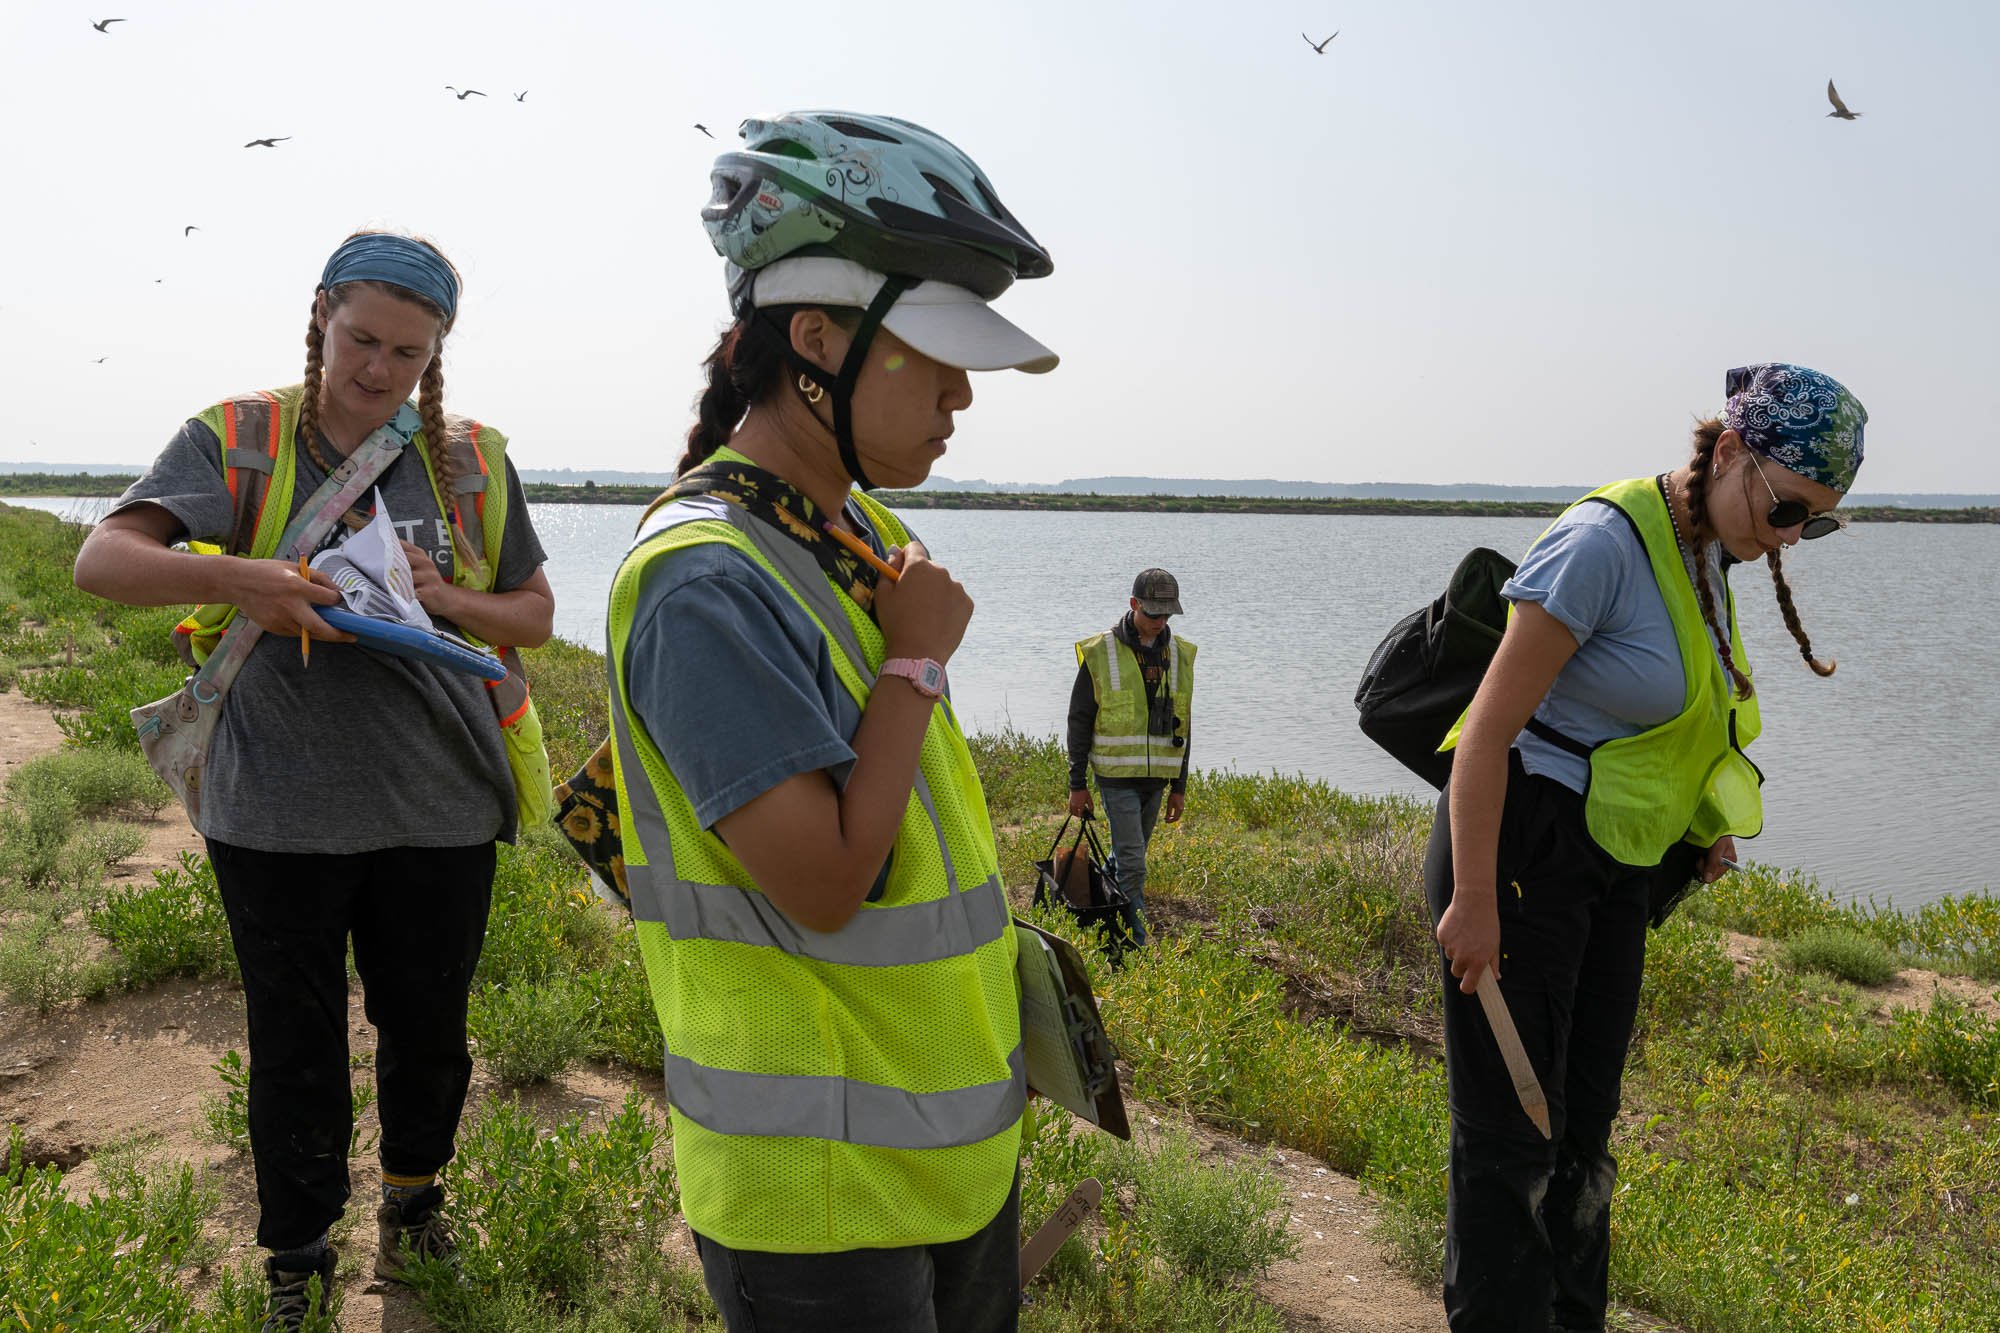  A team from the United States Geological Survey (USGS) visits Common and Least Tern nesting colonies on Poplar Island in Talbot County, Md. on June 28, 2023. Working with the Diann Prosser Research Lab at USGS, the team has been surveying Least and 